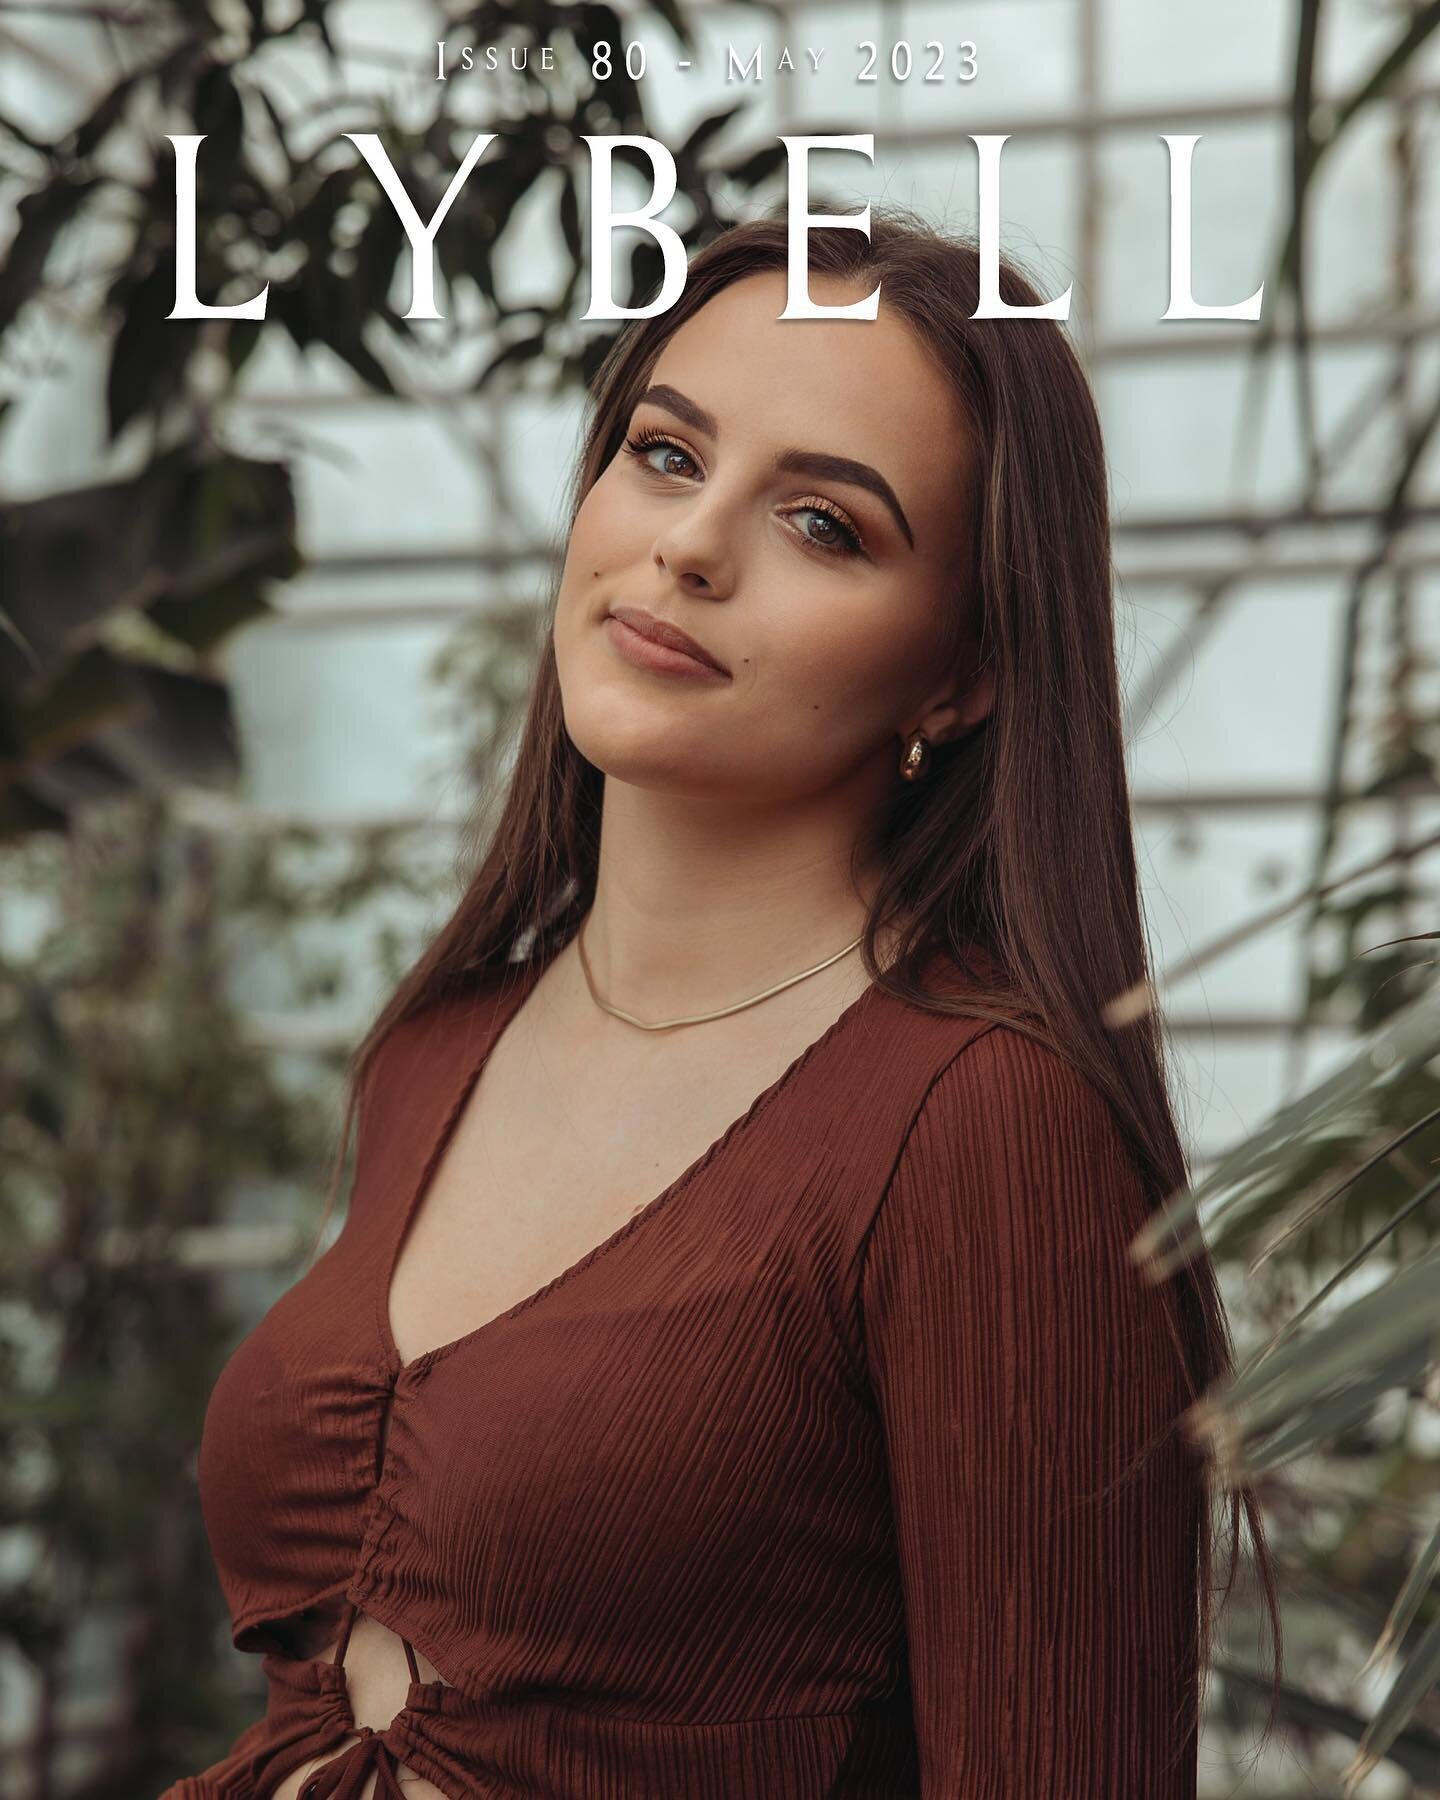 Cover photo of Issue 80! Click the link in our bio and go to &ldquo;Shop&rdquo; to check out the issue!
Model: @lea.yerly 
Photographer: @ekiarts 
_____________________________________________
Lybell is an international magazine that features talente